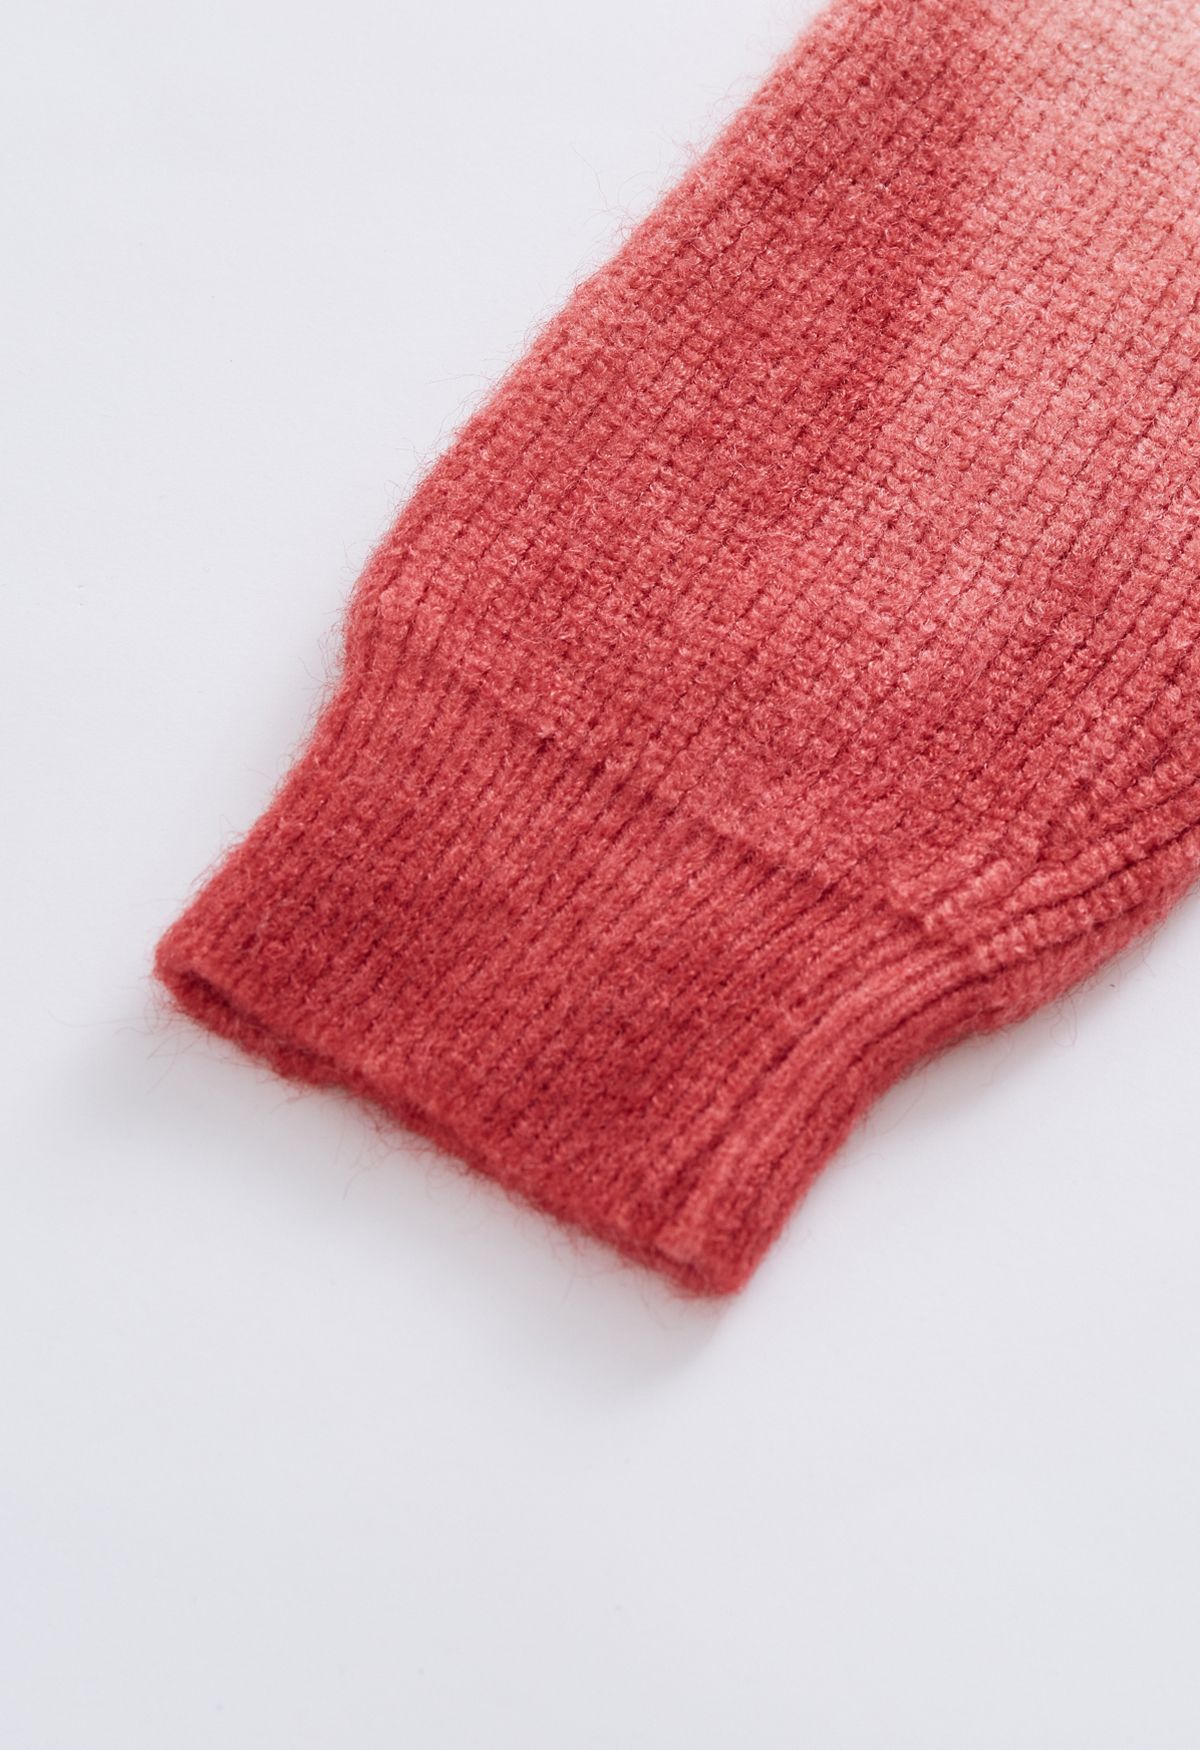 Ombre Round Neck Rib Knit Sweater in Pink